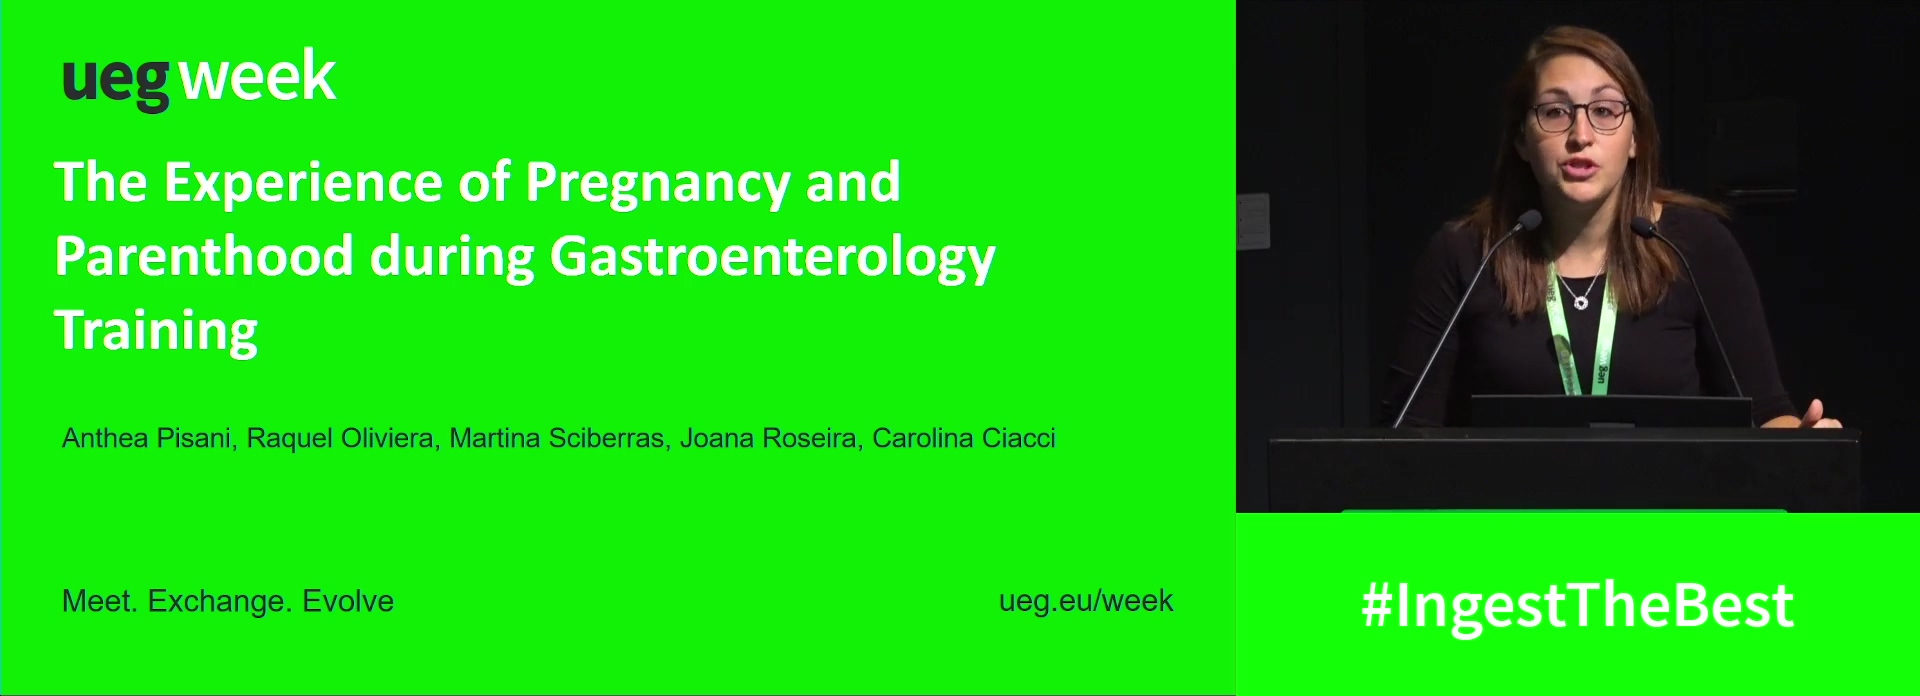 THE EXPERIENCE OF PREGNANCY AND PARENTHOOD DURING GASTROENTEROLOGY TRAINING